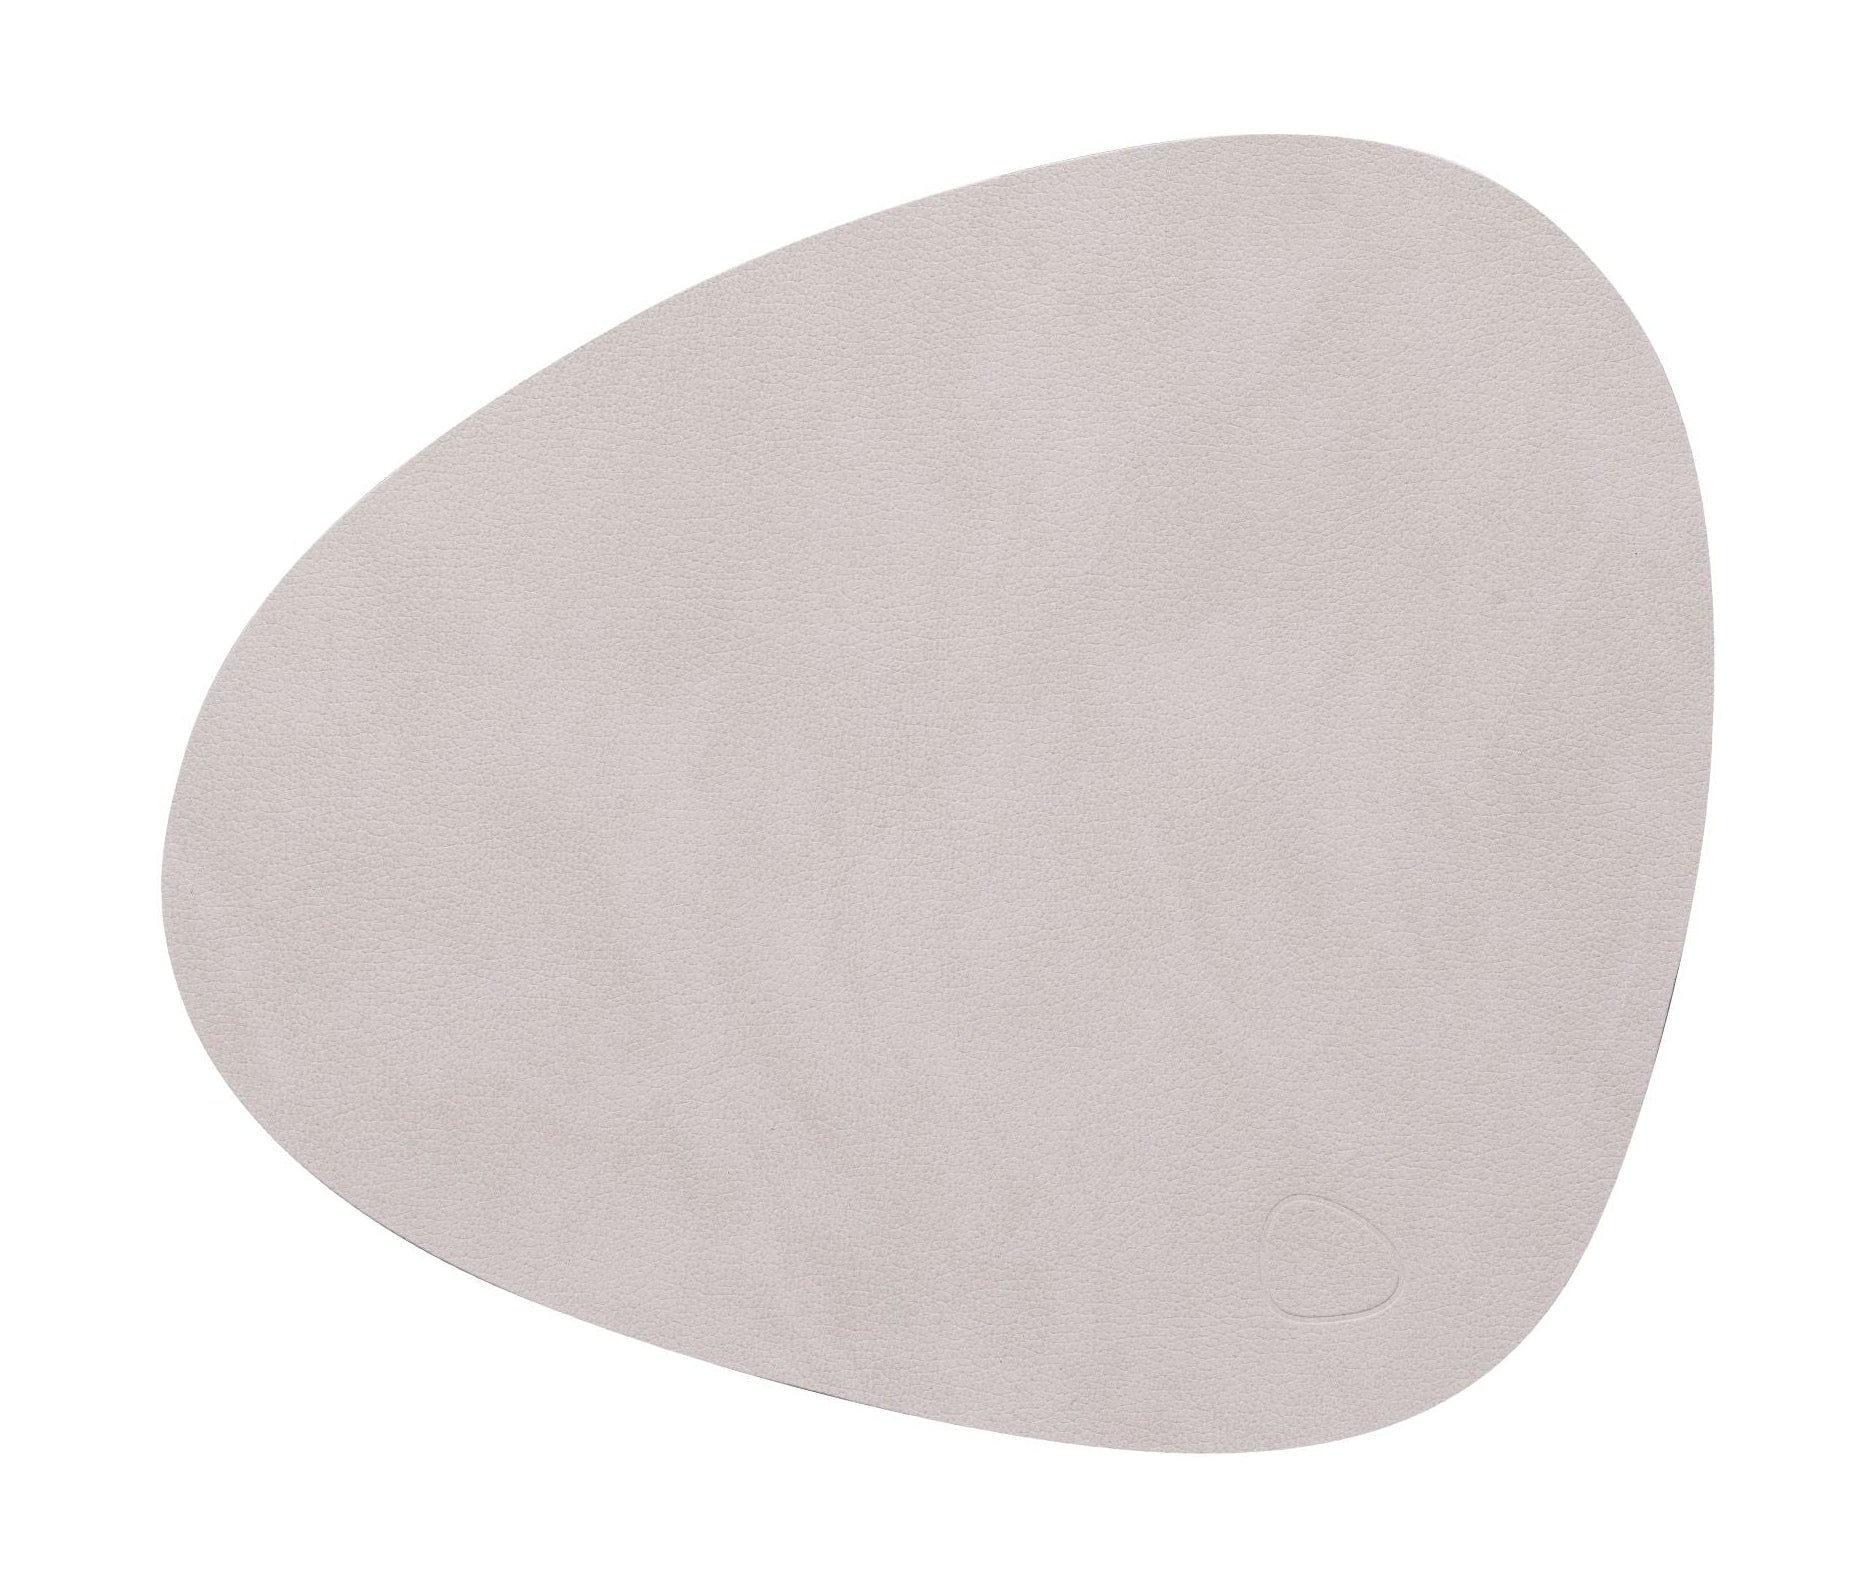 Lind ADN Table Mat Curve S, Oyster White